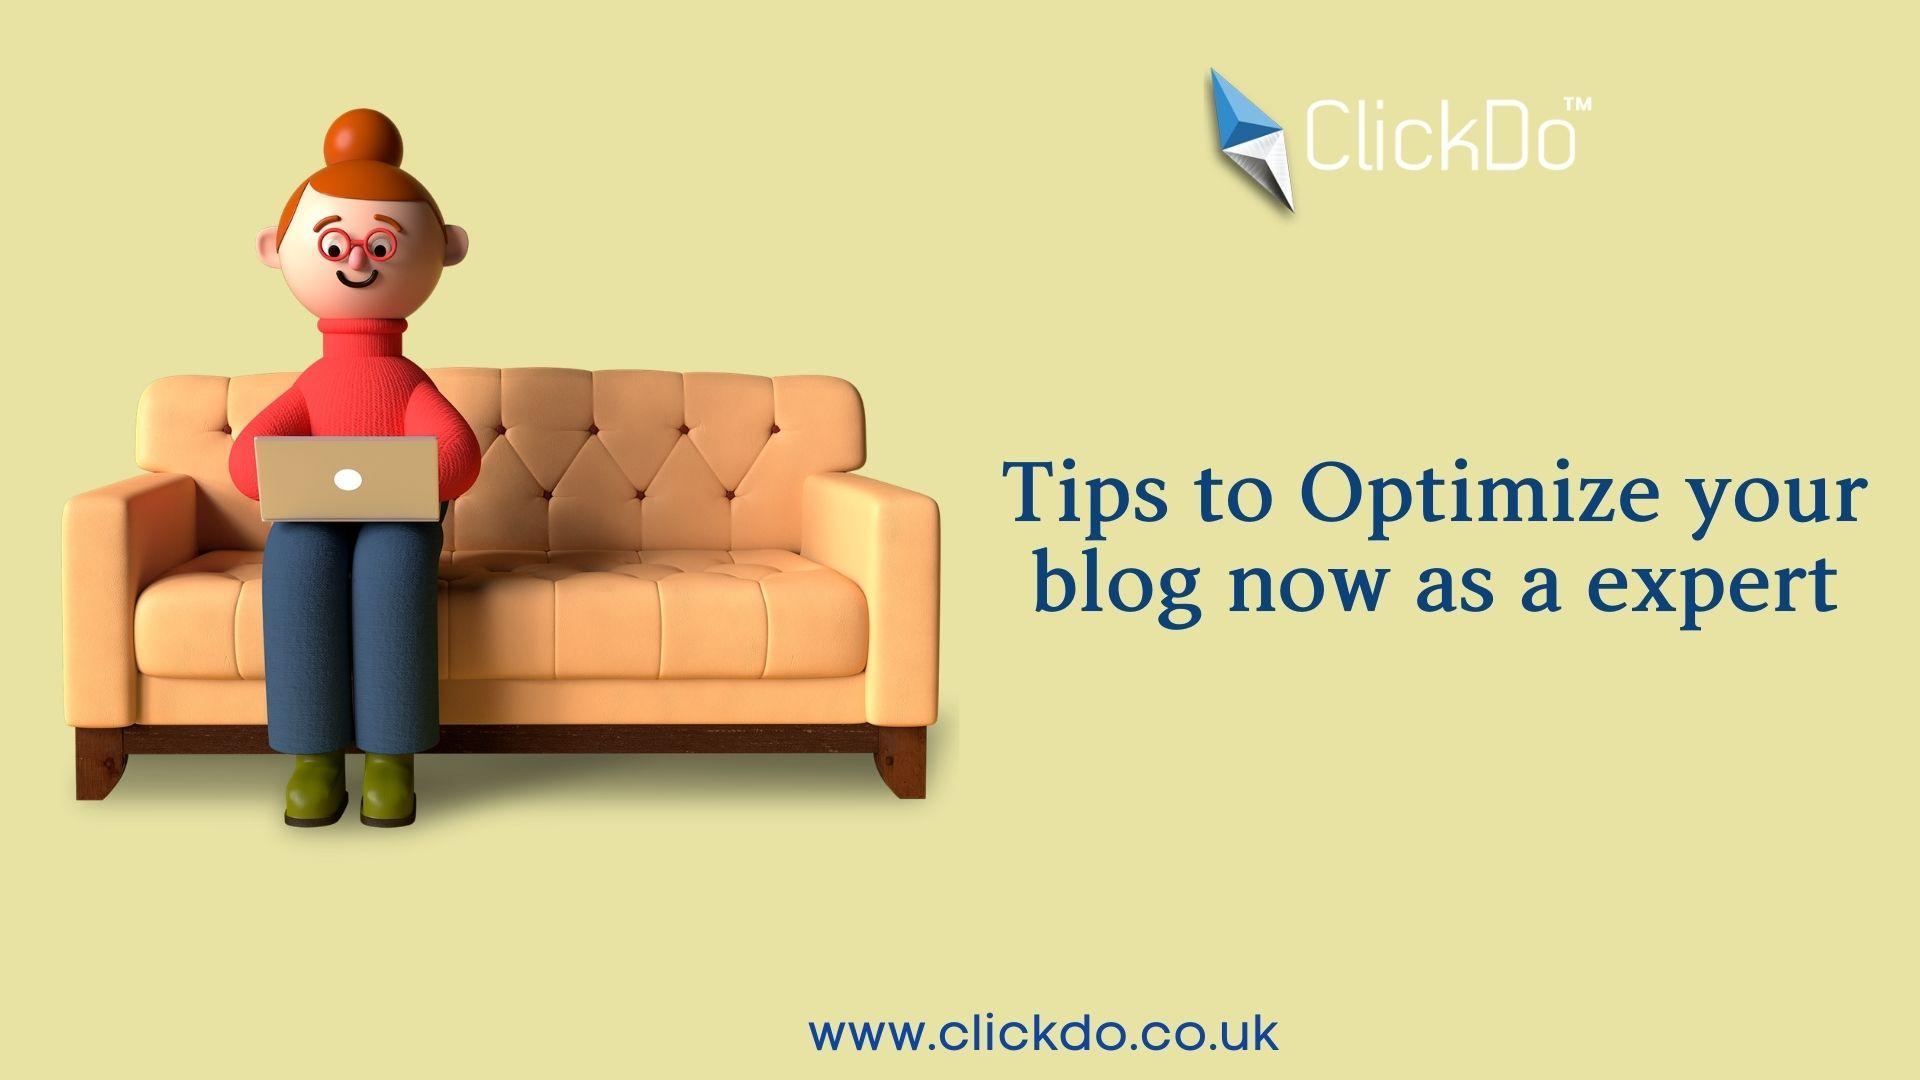 Tips to Optimize your blog now as a expert